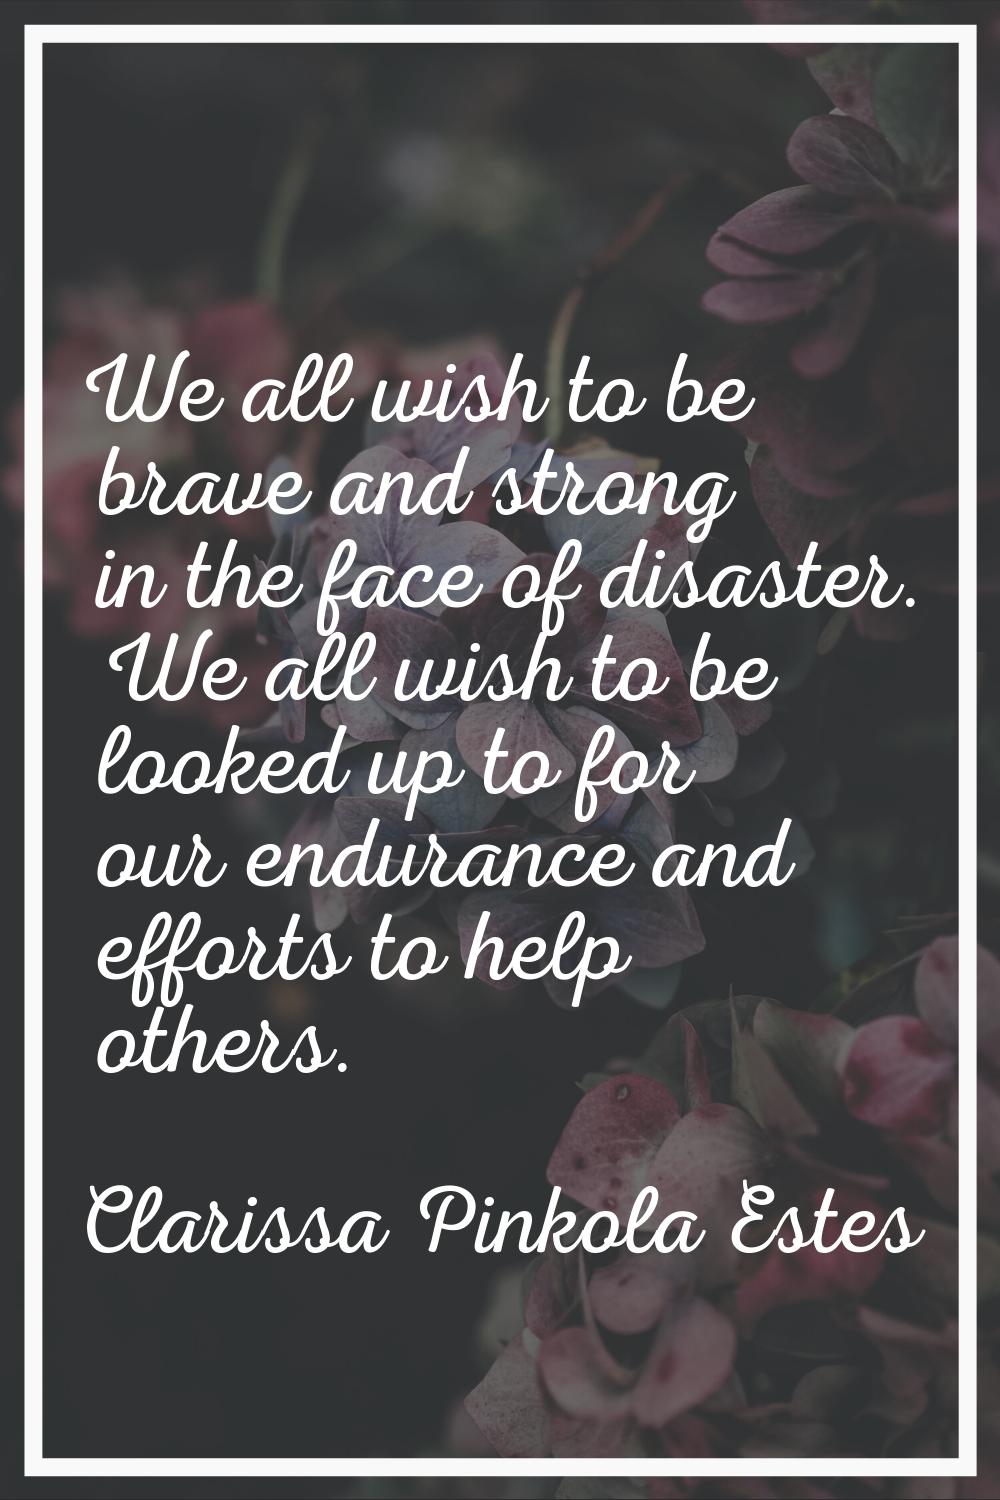 We all wish to be brave and strong in the face of disaster. We all wish to be looked up to for our 